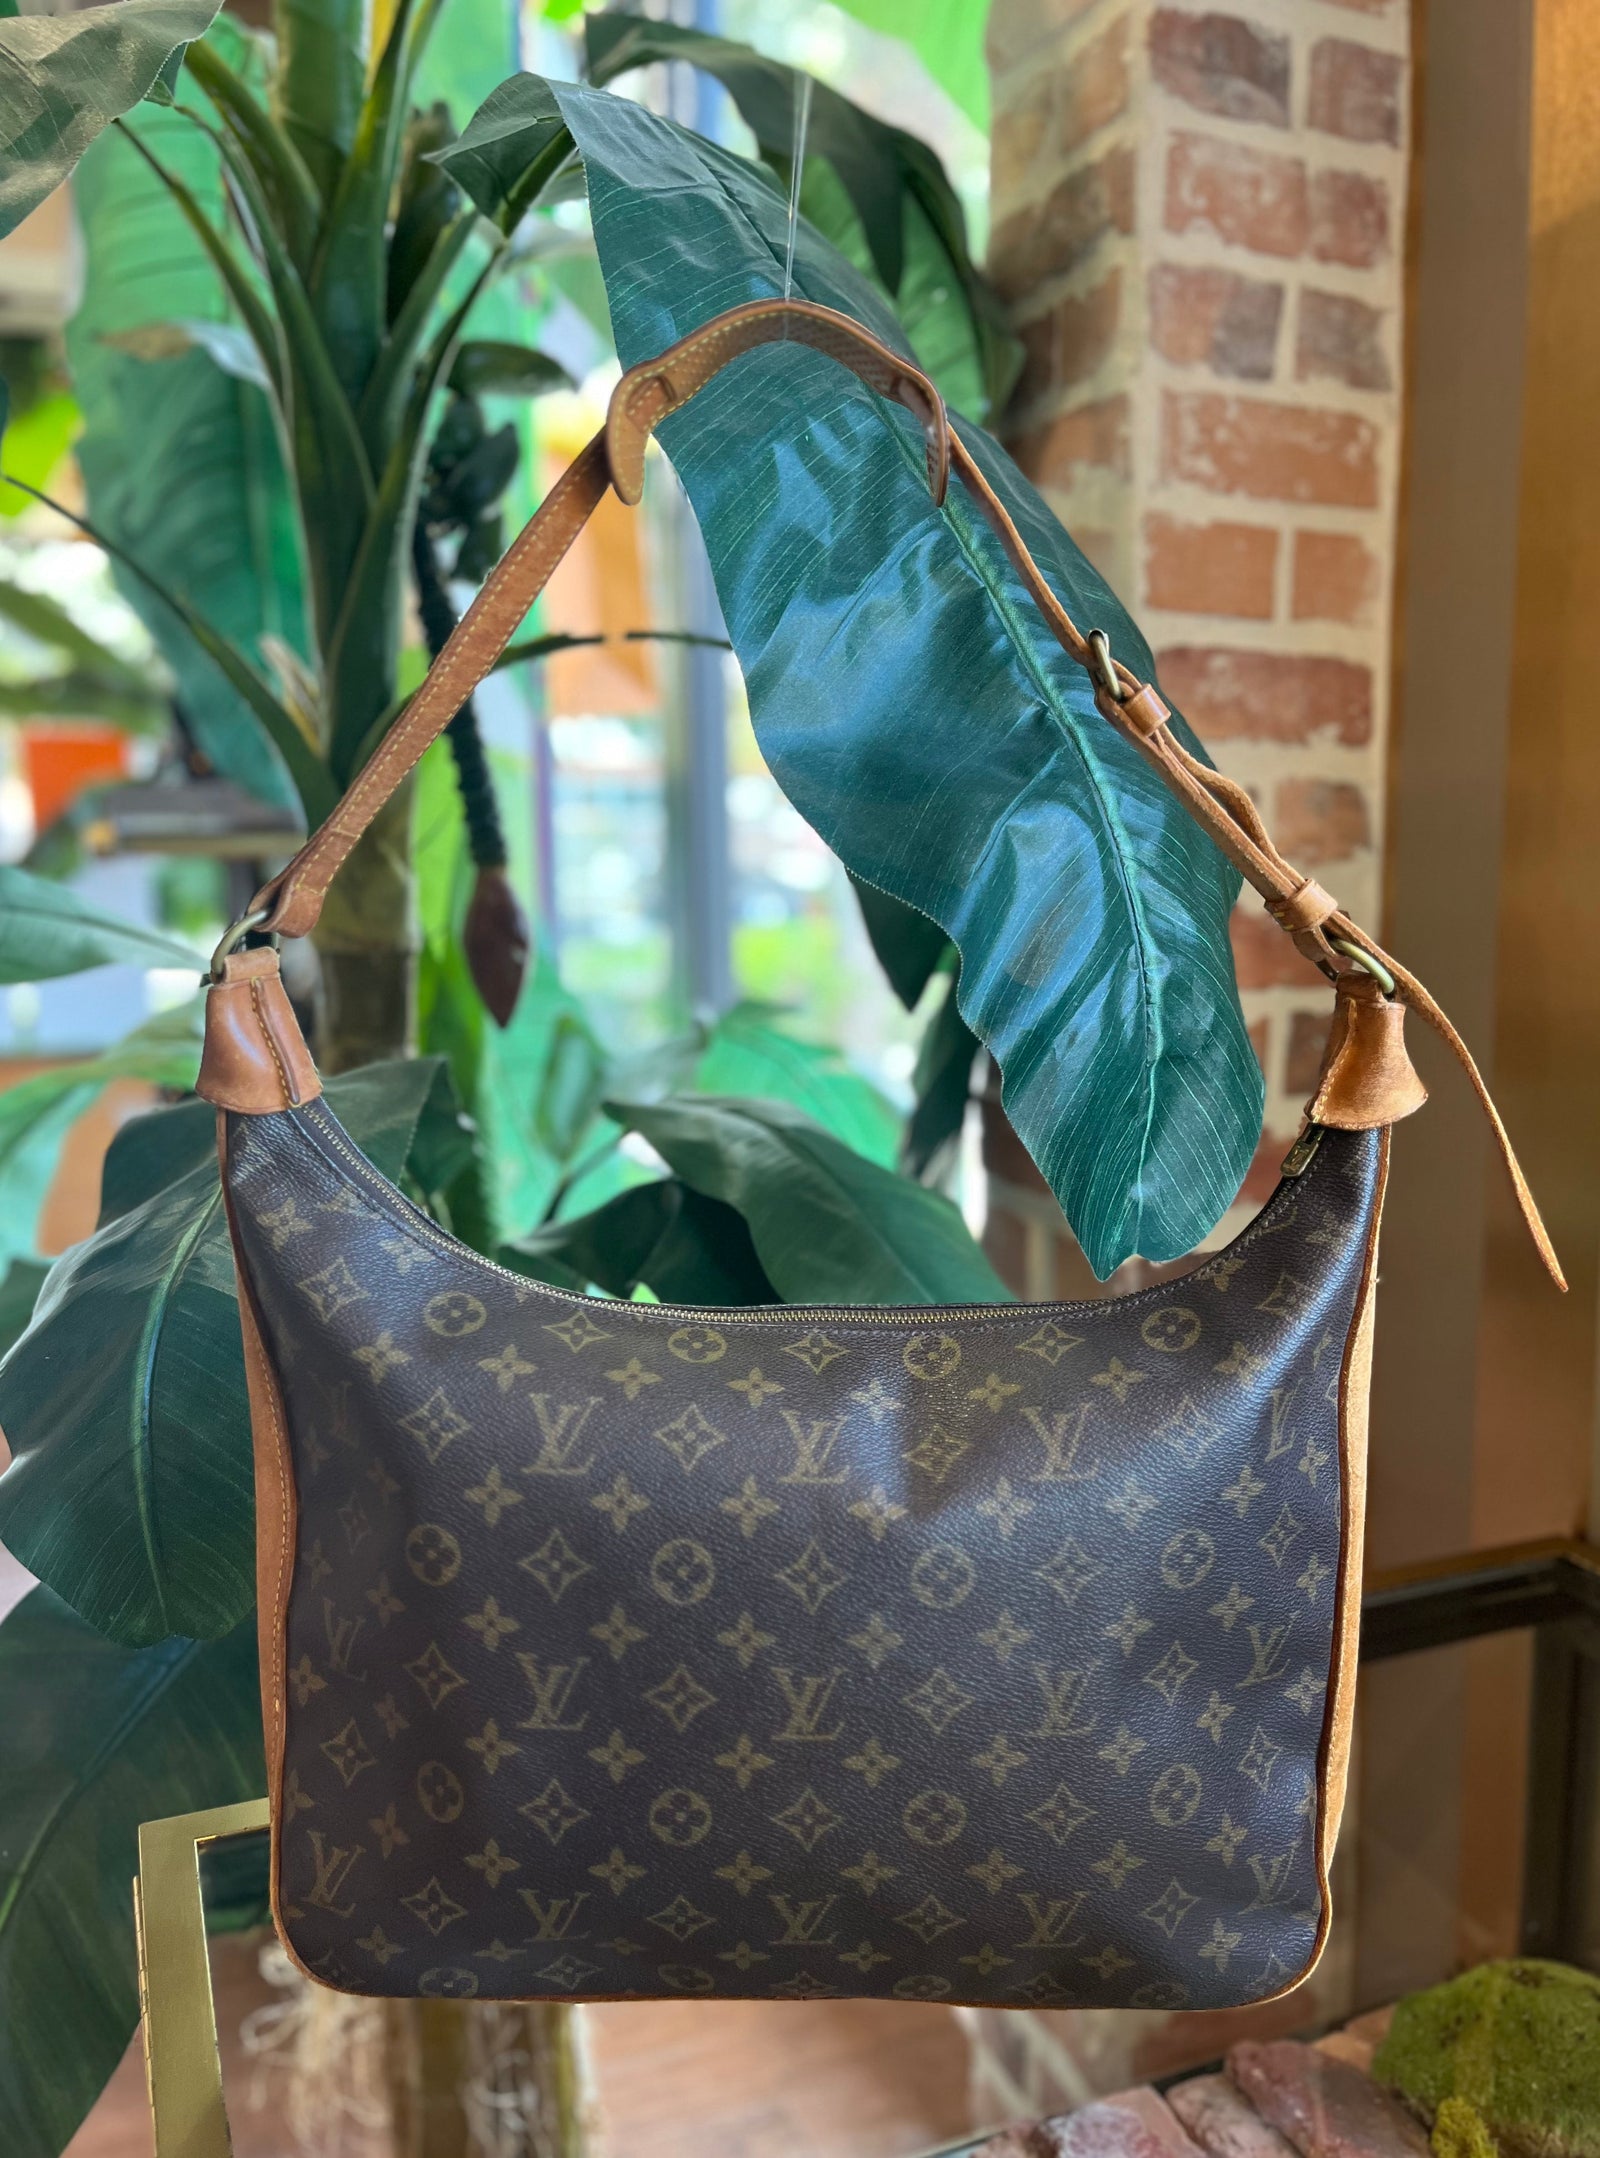 The new LV Carryall PM ❤️